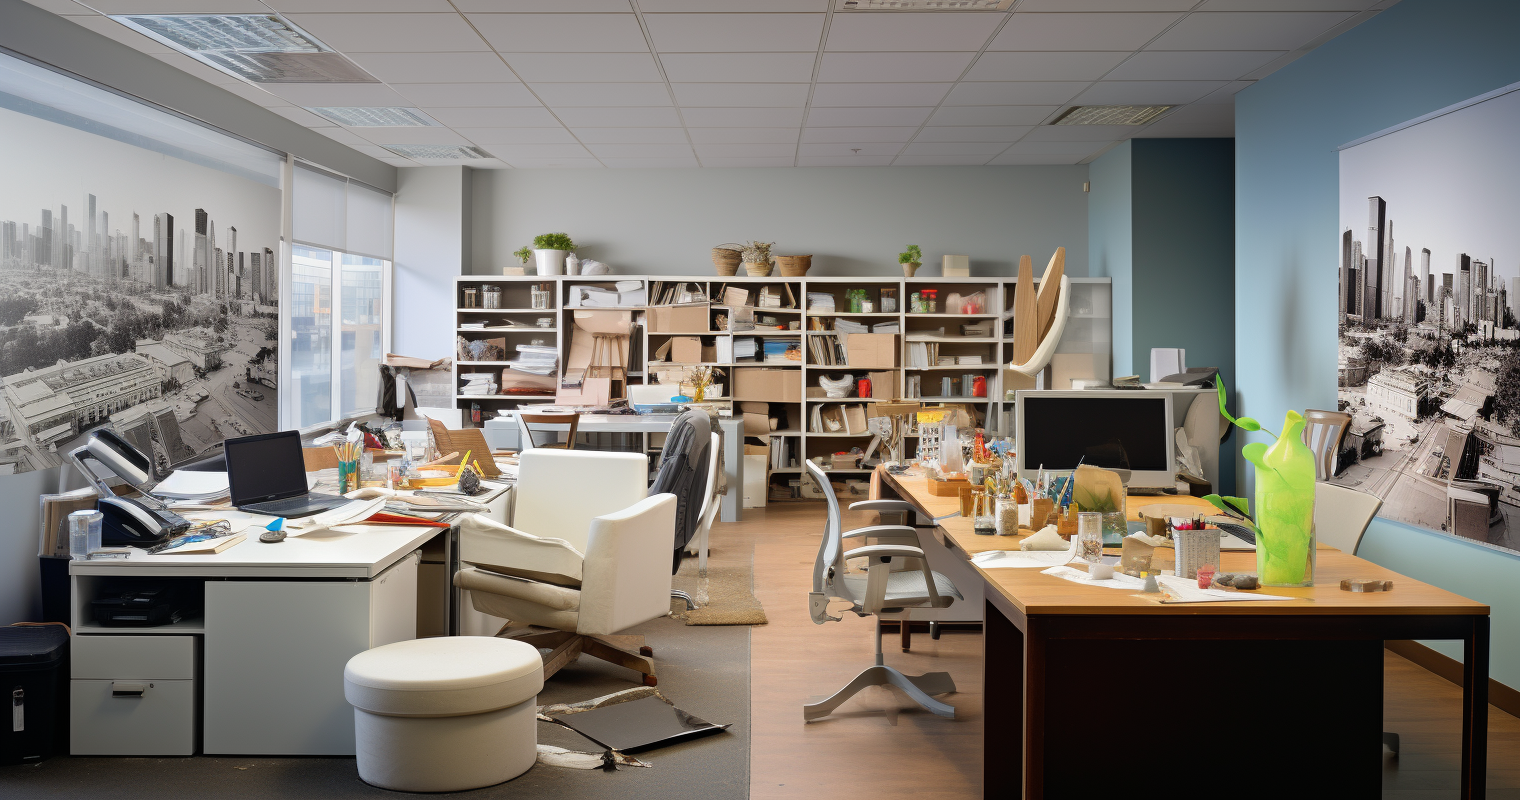 Transforming a cluttered office into a modern workspace